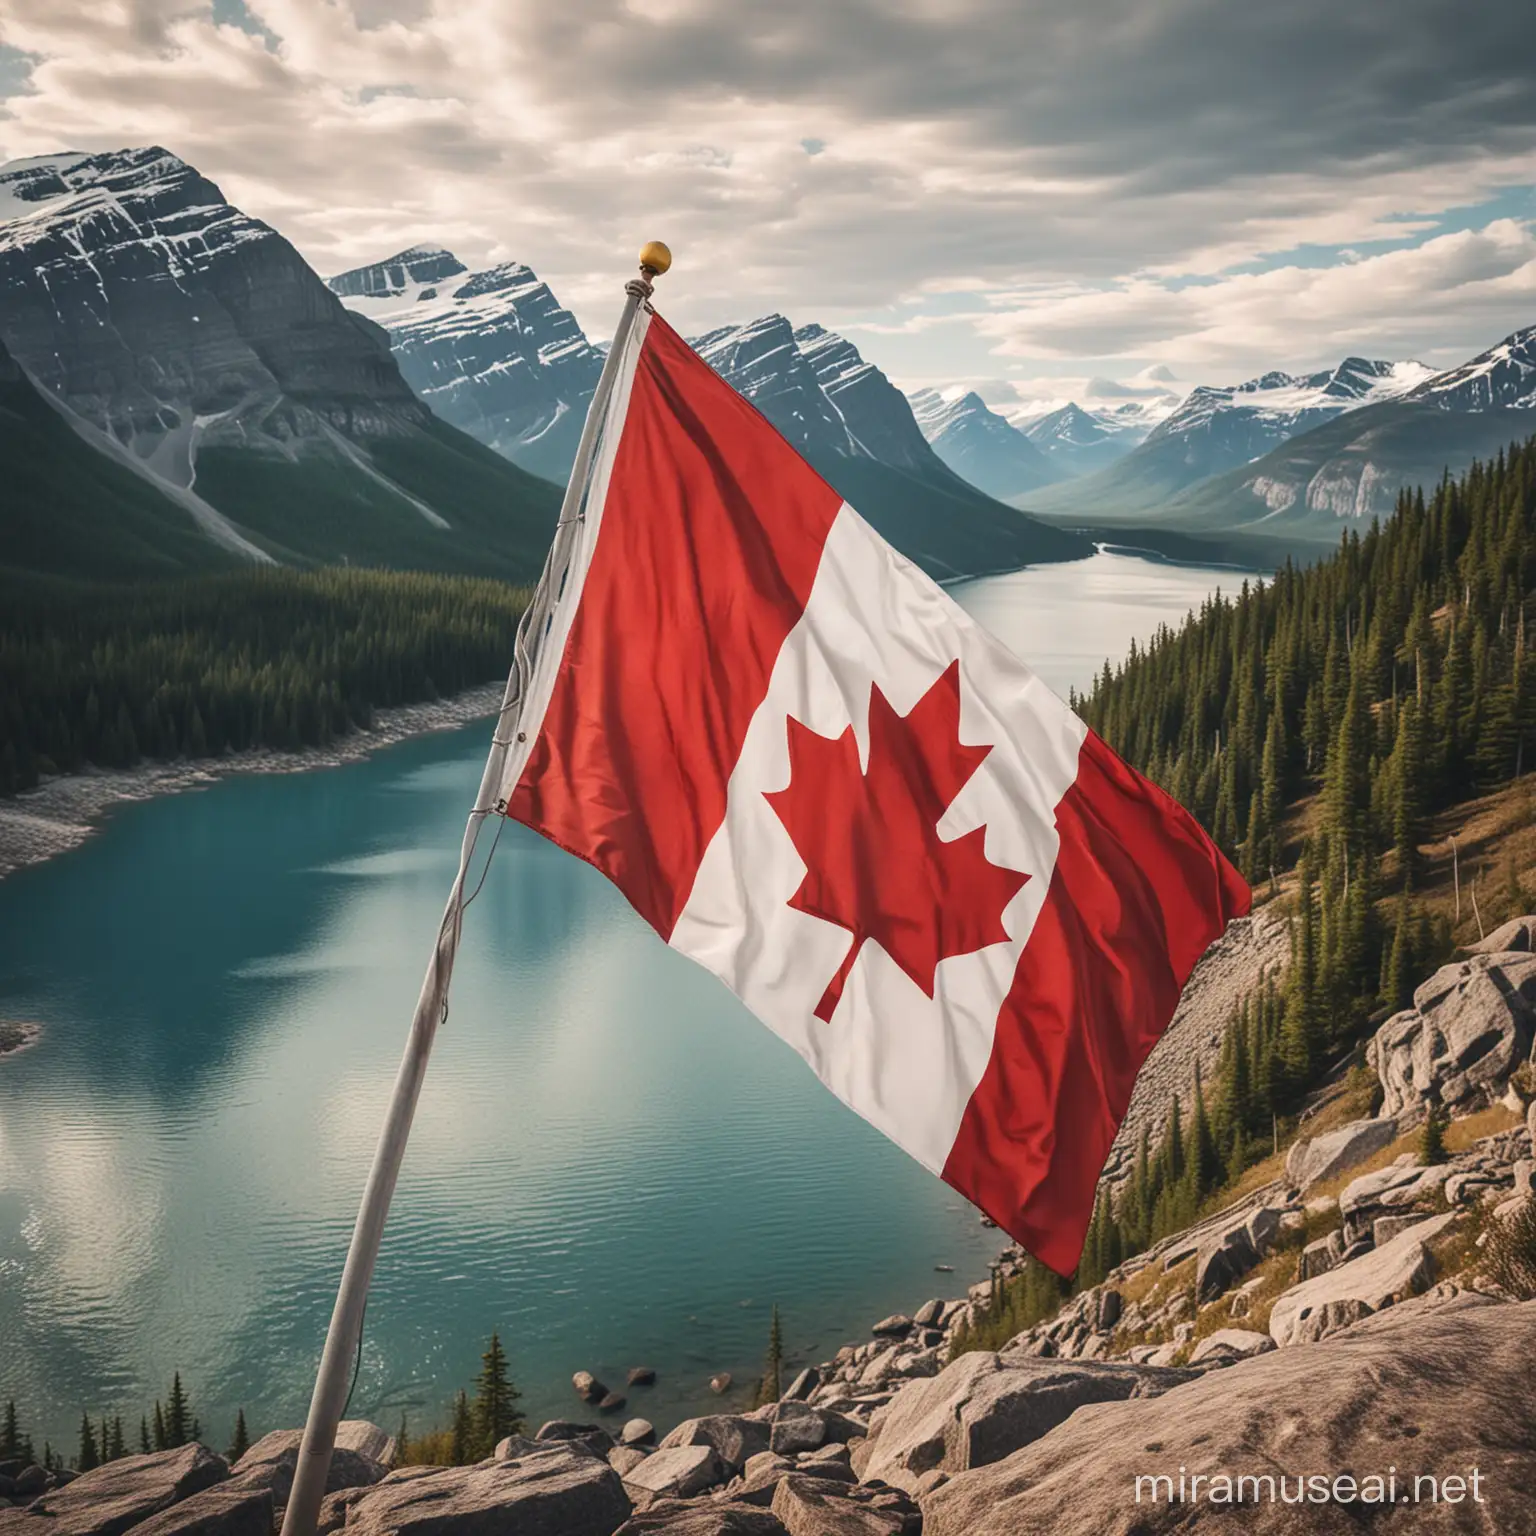 Background image of the Canadian flag waving against a scenic landscape